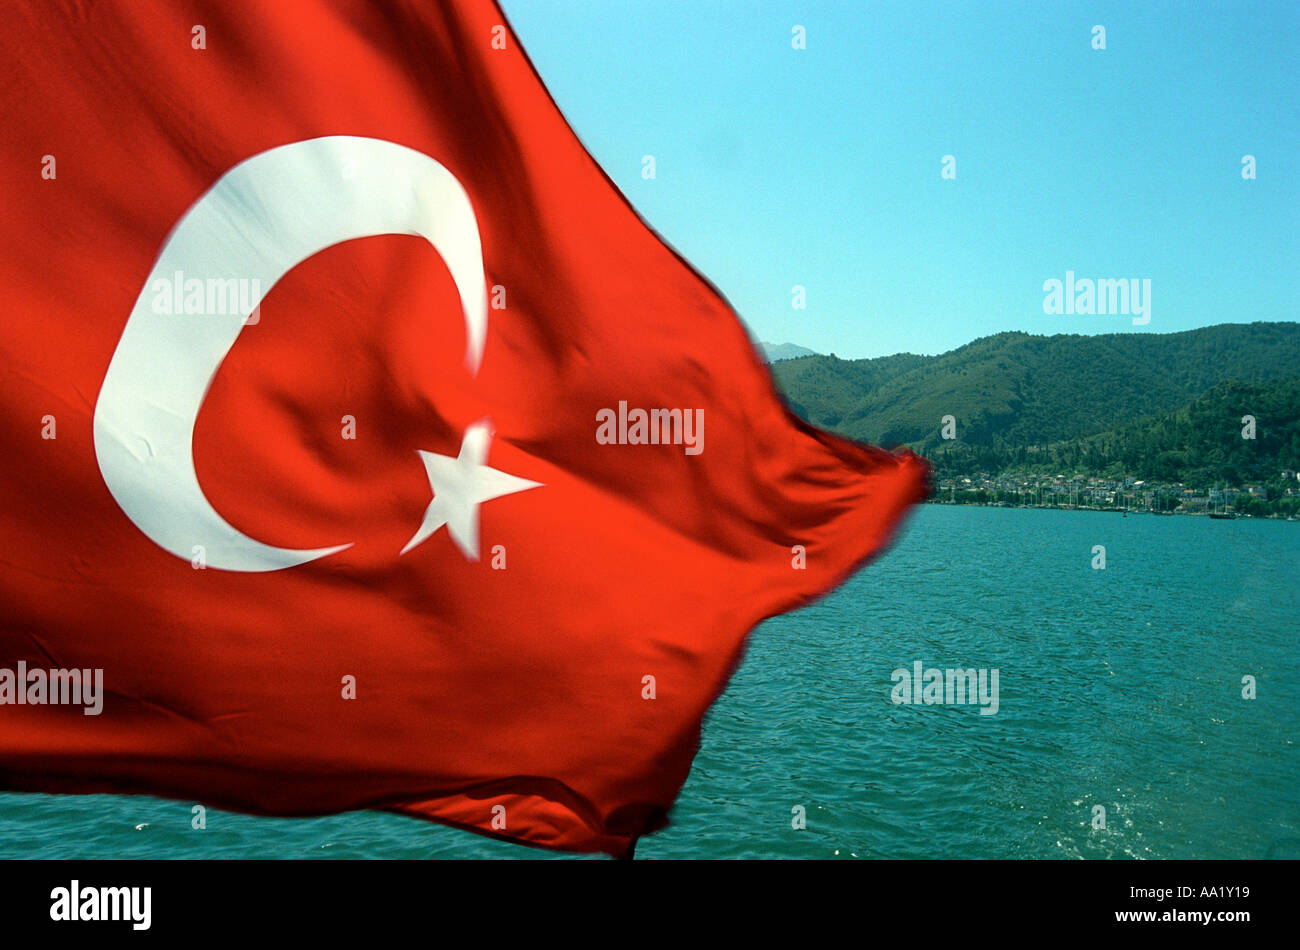 Flag of Turkey with Turkish coastline in the background Stock Photo